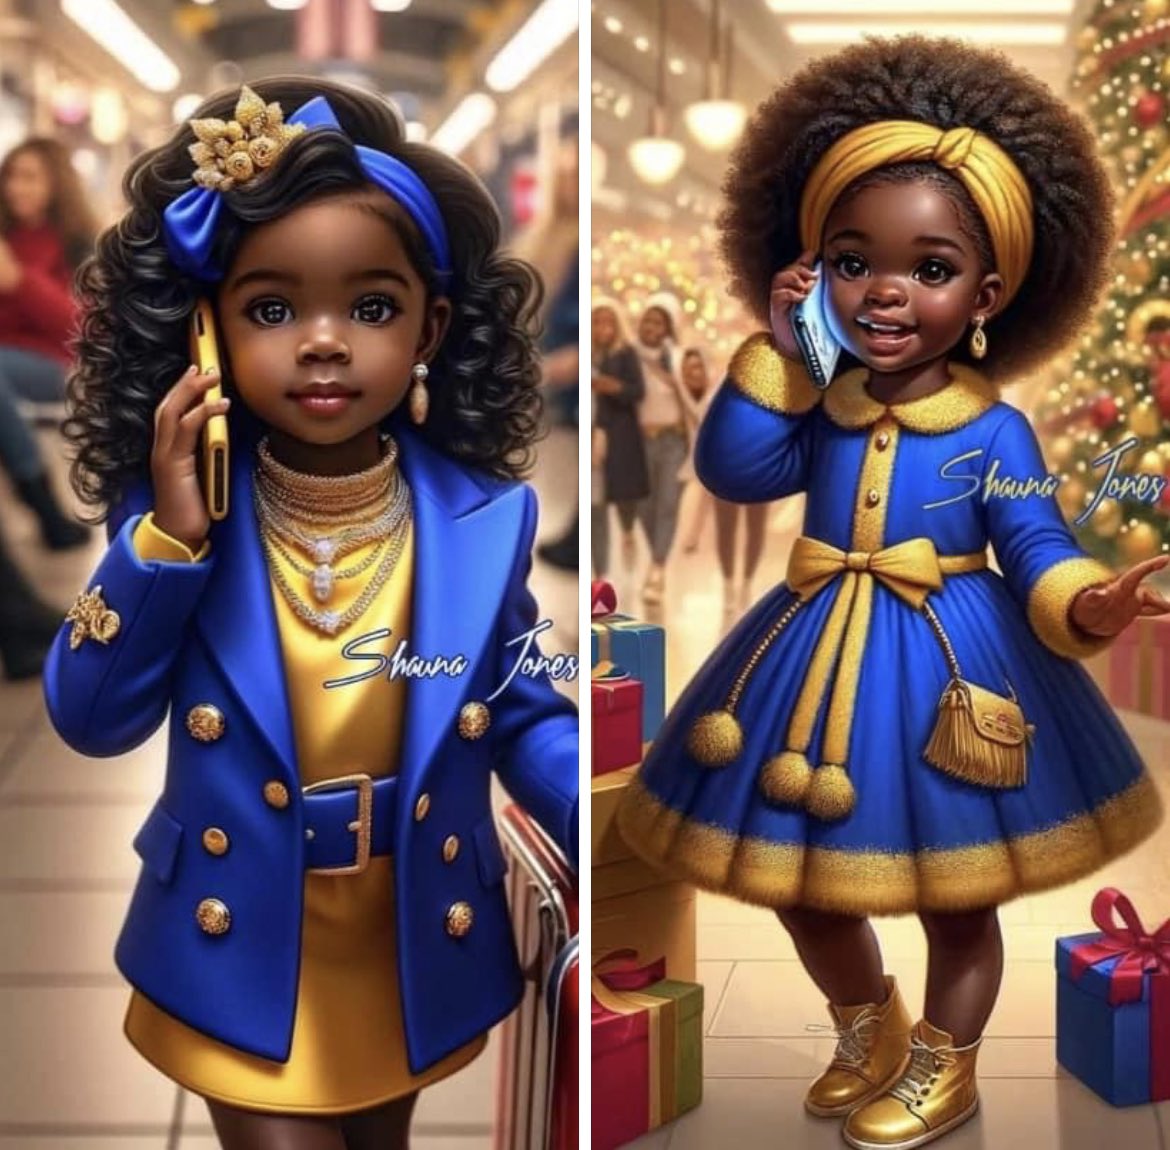 'When I grow up I want to be... greater, I'm starting now' #Sgrho101